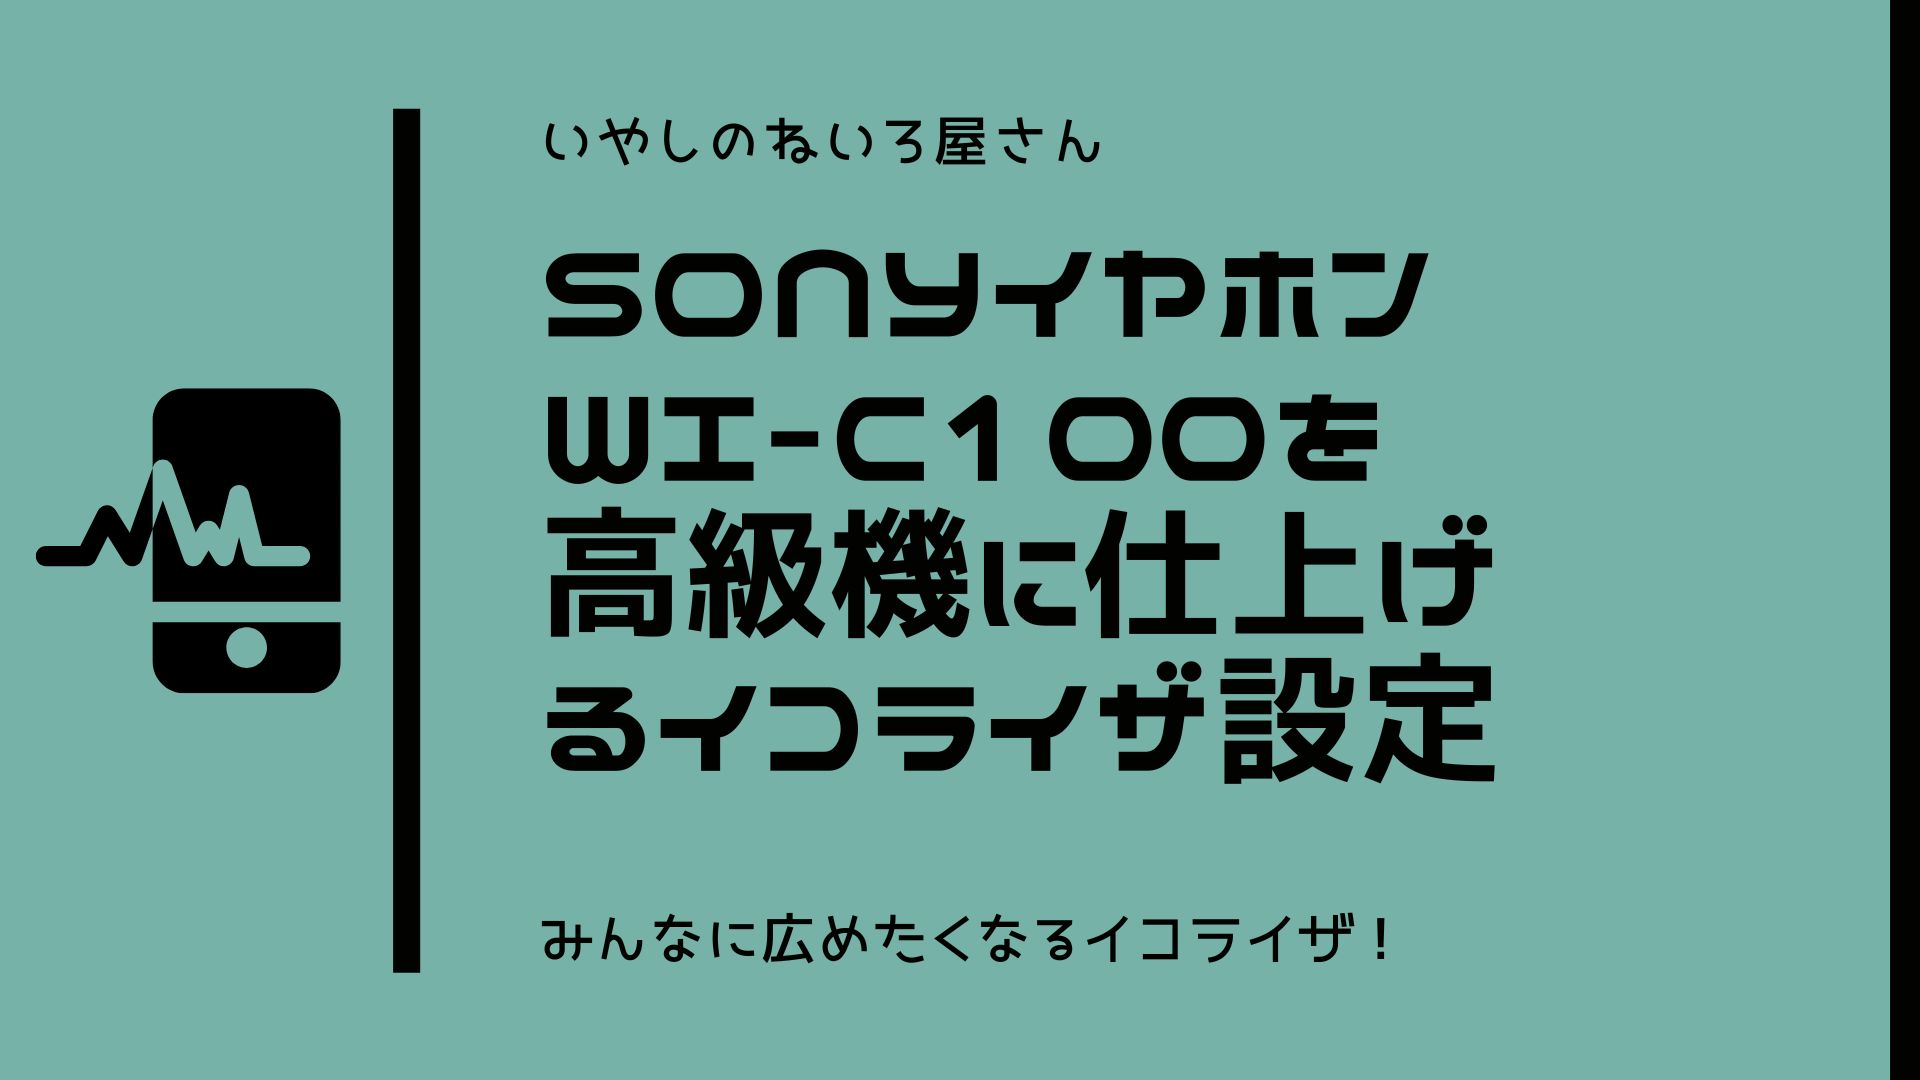 SONY WI-C100 イコライザ